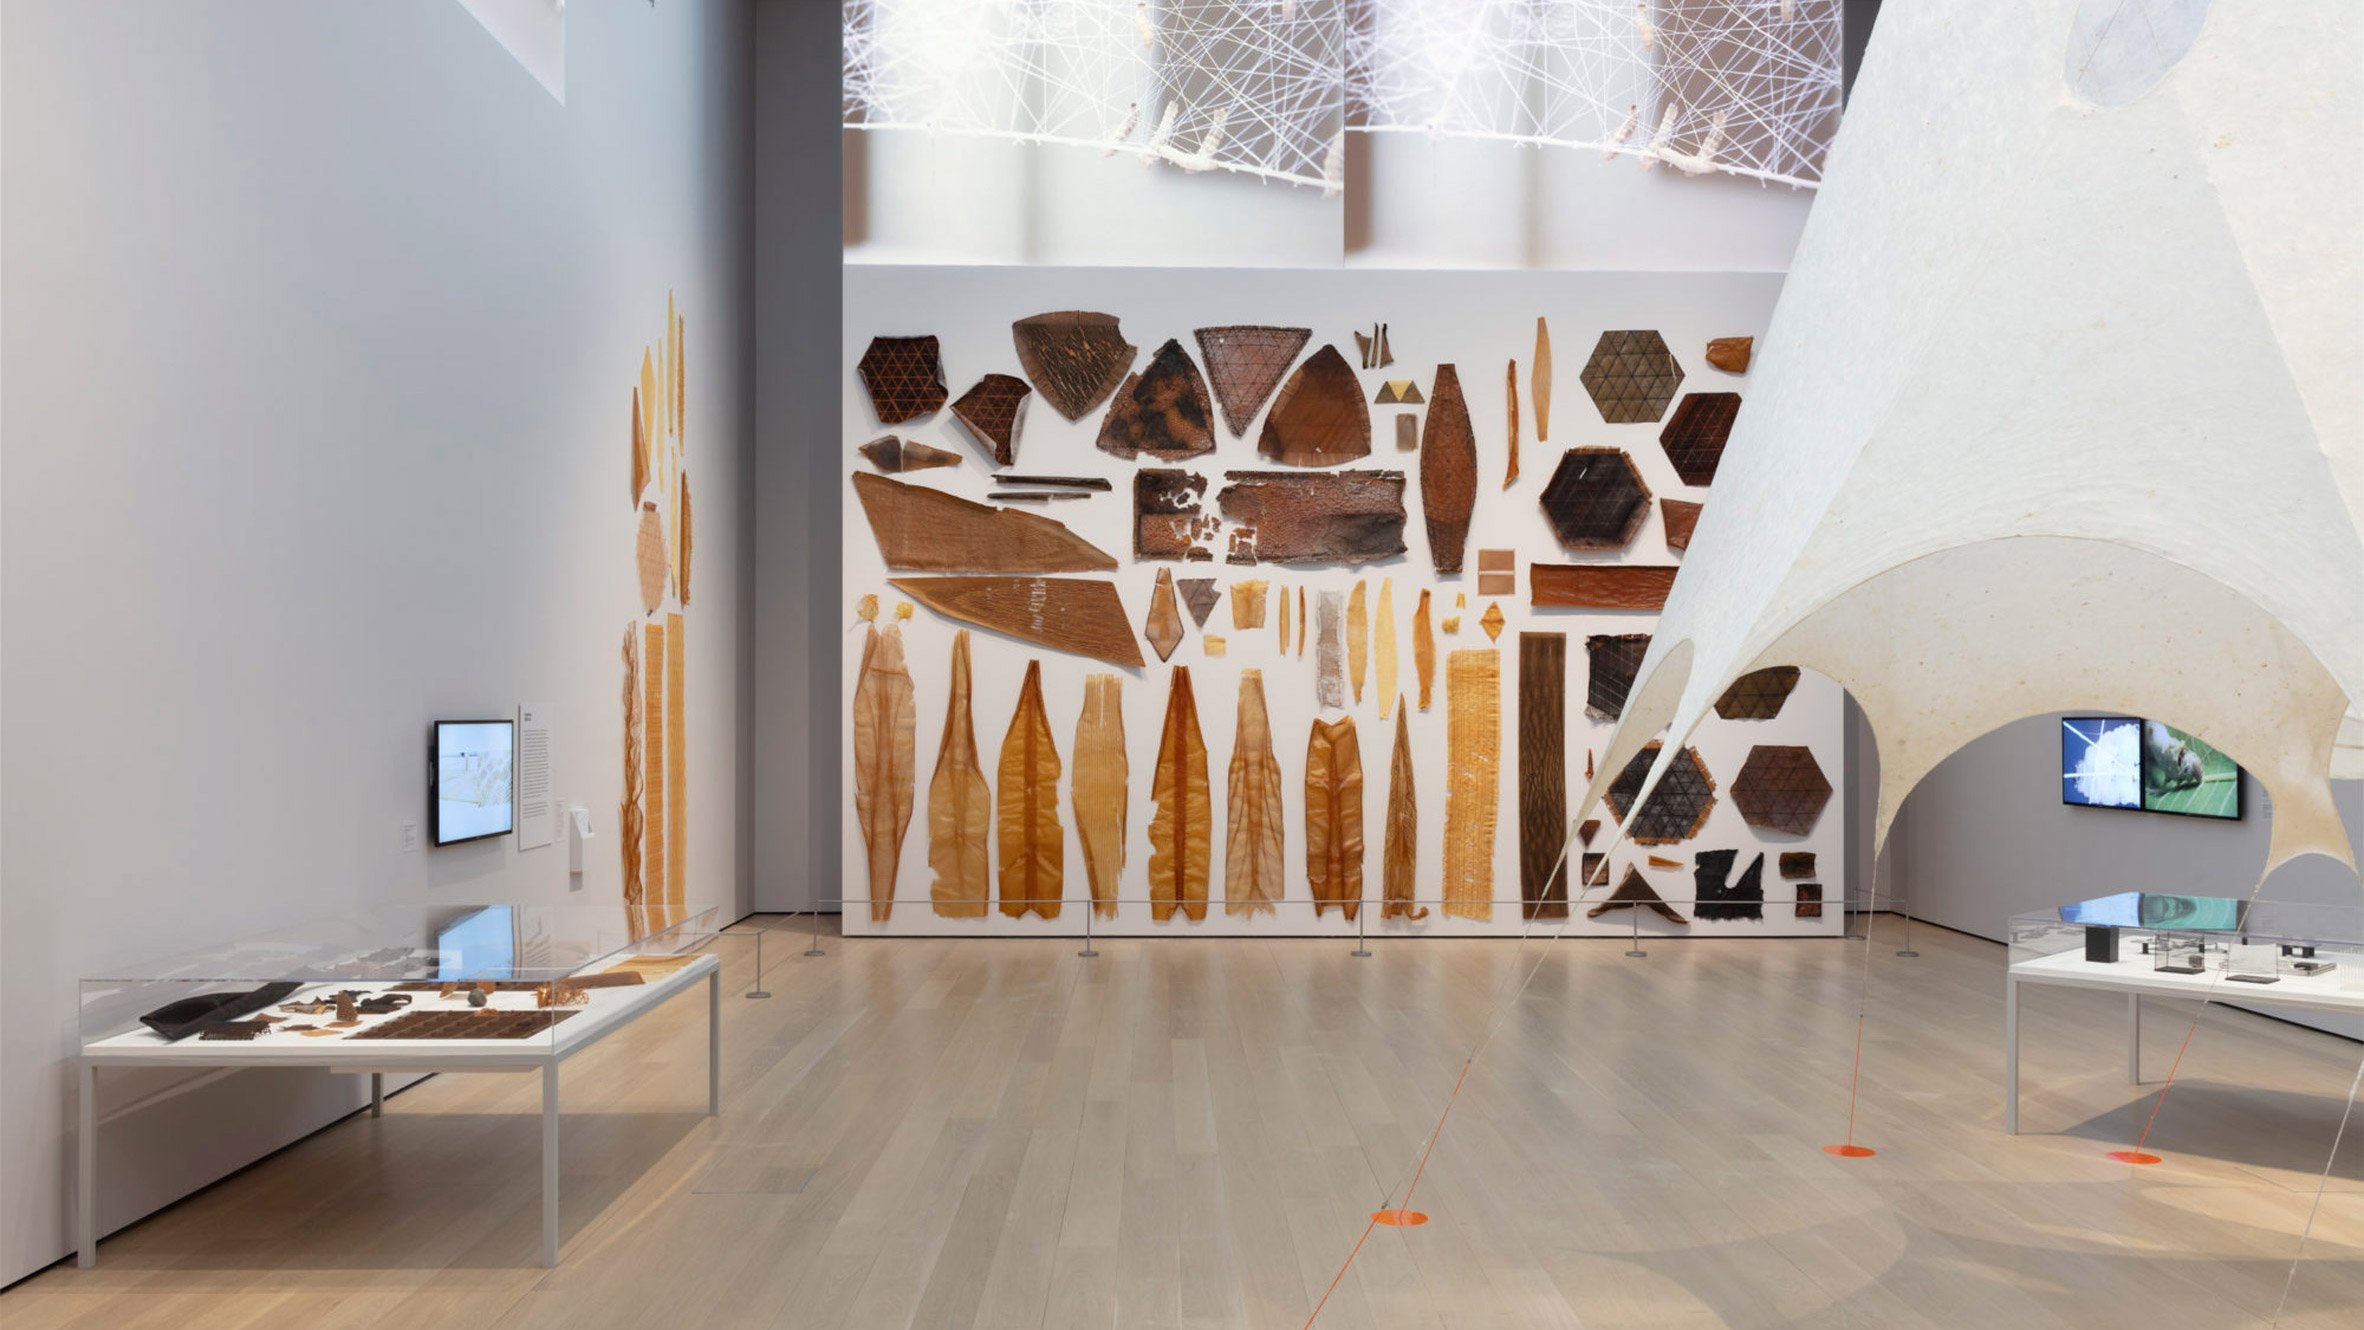 Formålet træt Bermad Neri Oxman's body of work displayed in MoMA exhibition Material Ecology